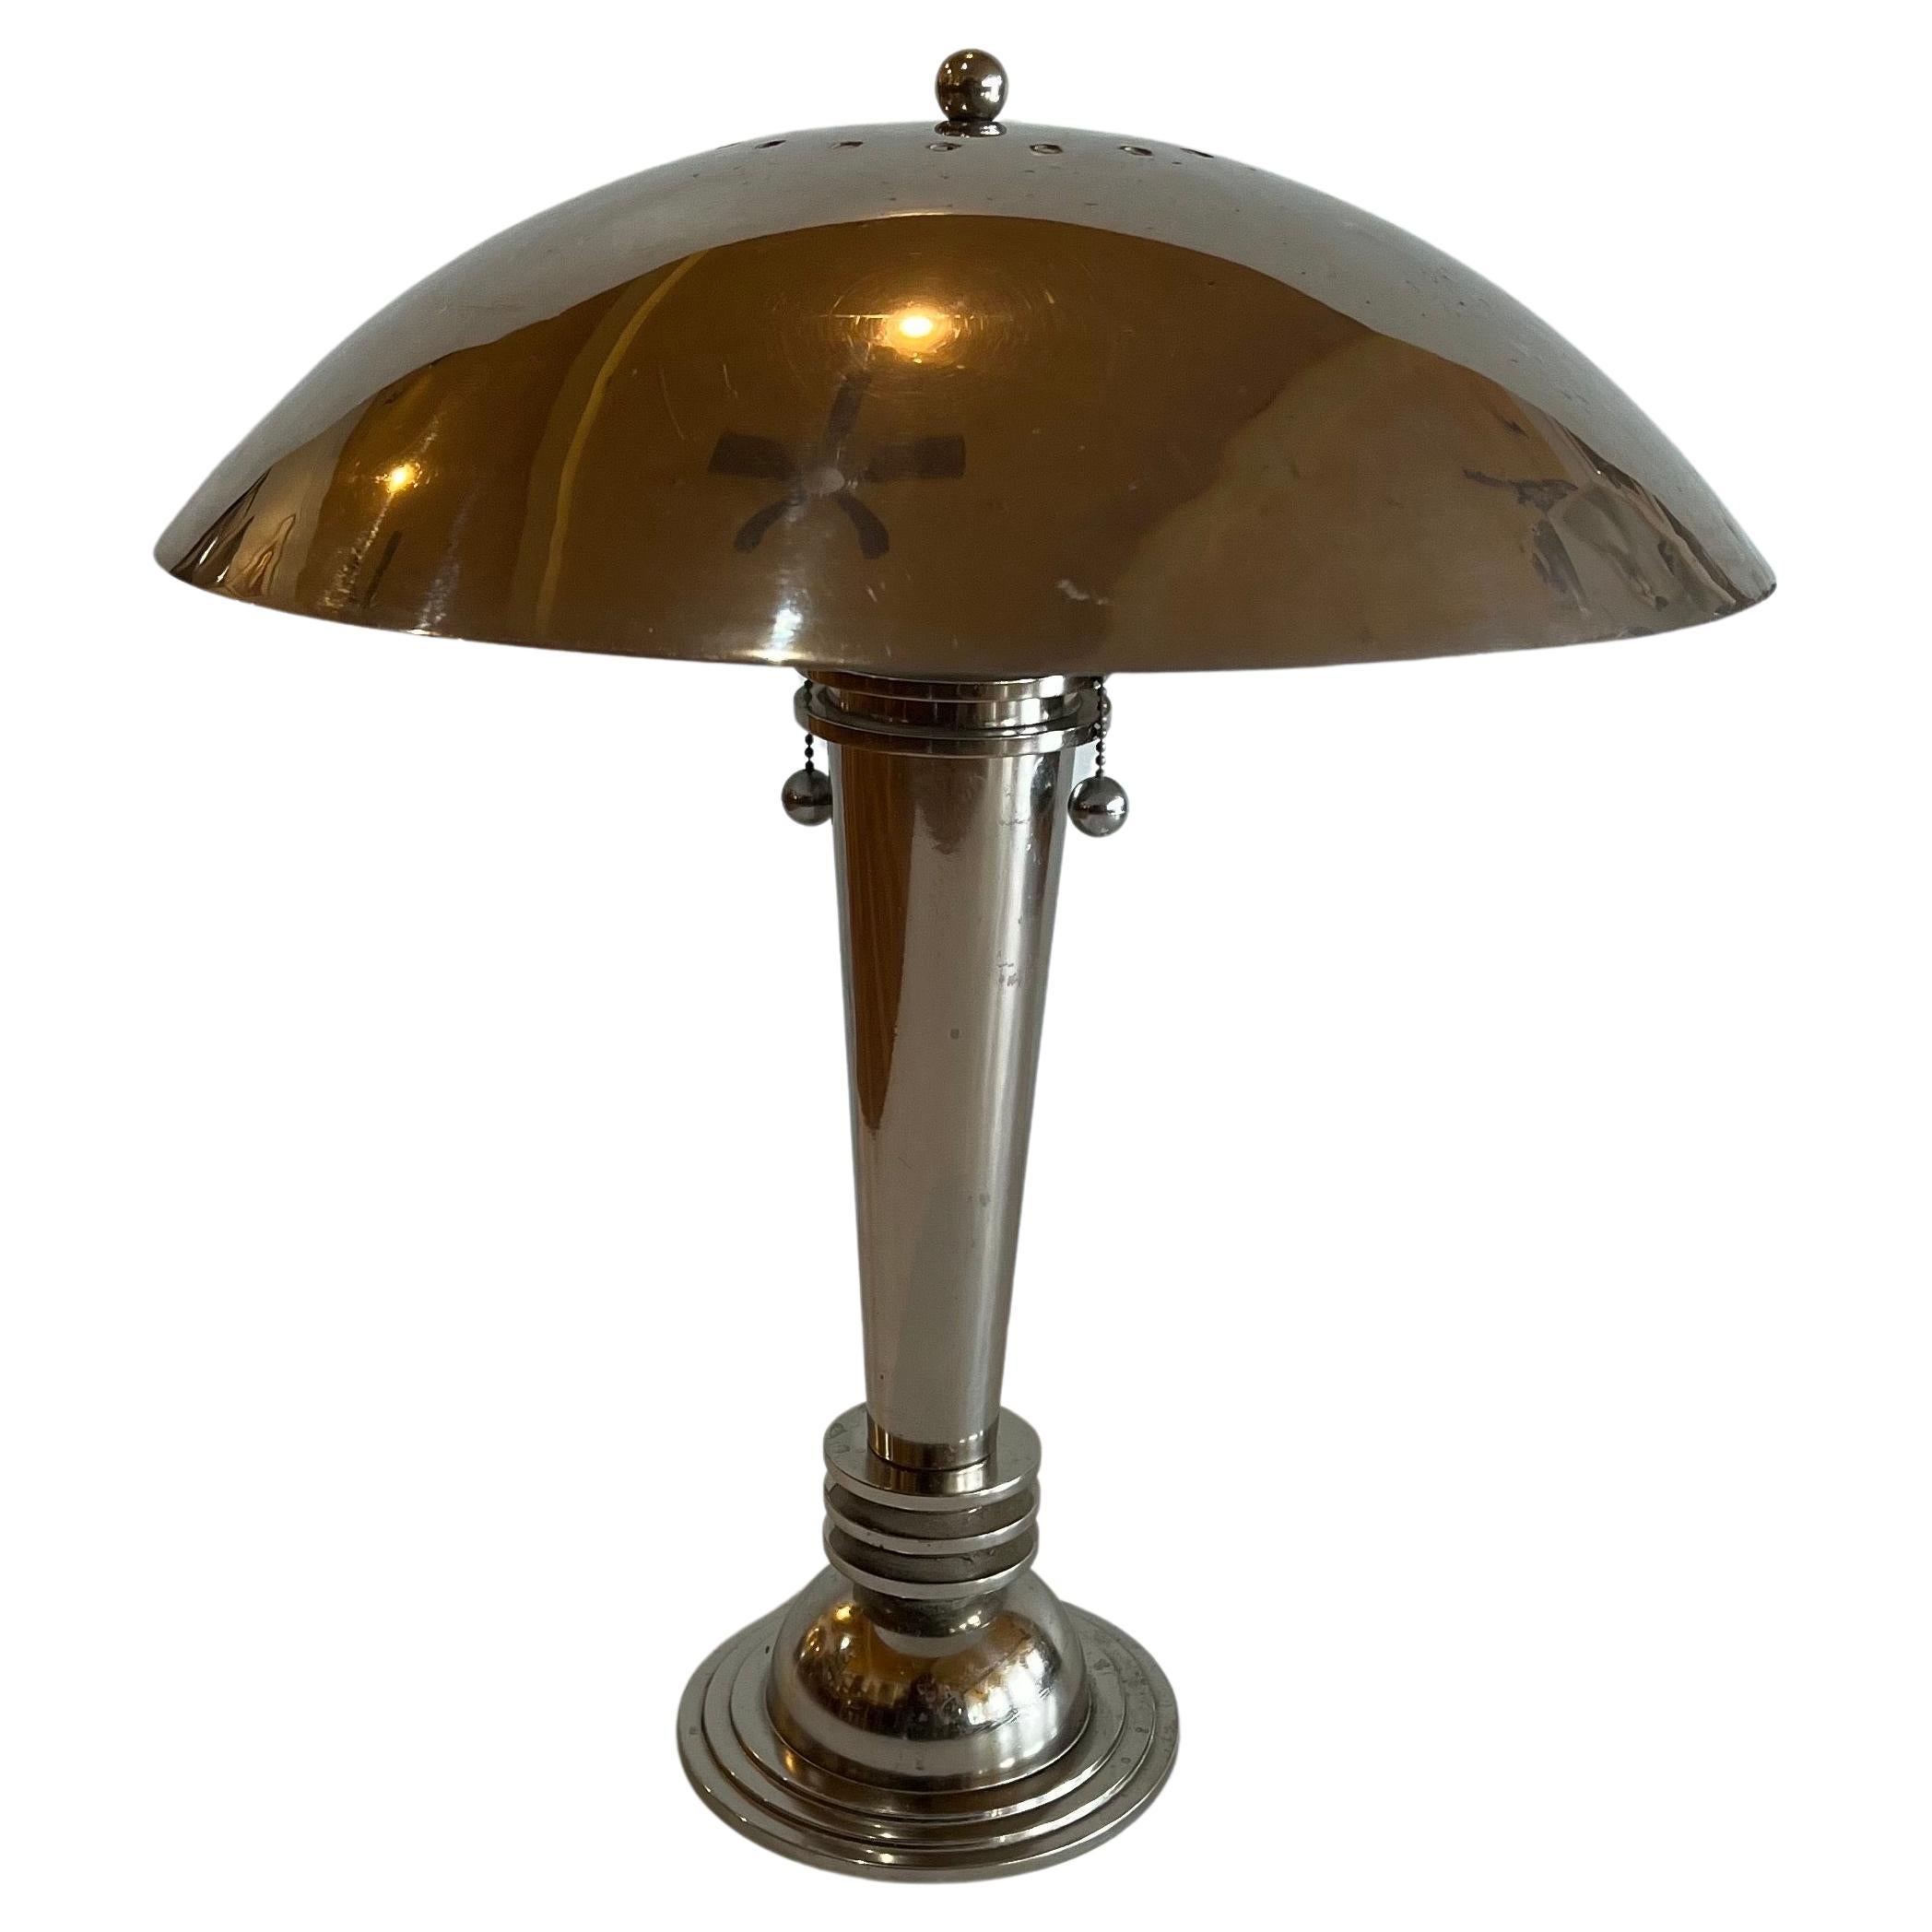 Art Deco Machine Age Majestic Nickel Plated Desk Table Lamp by Woka Lamps 